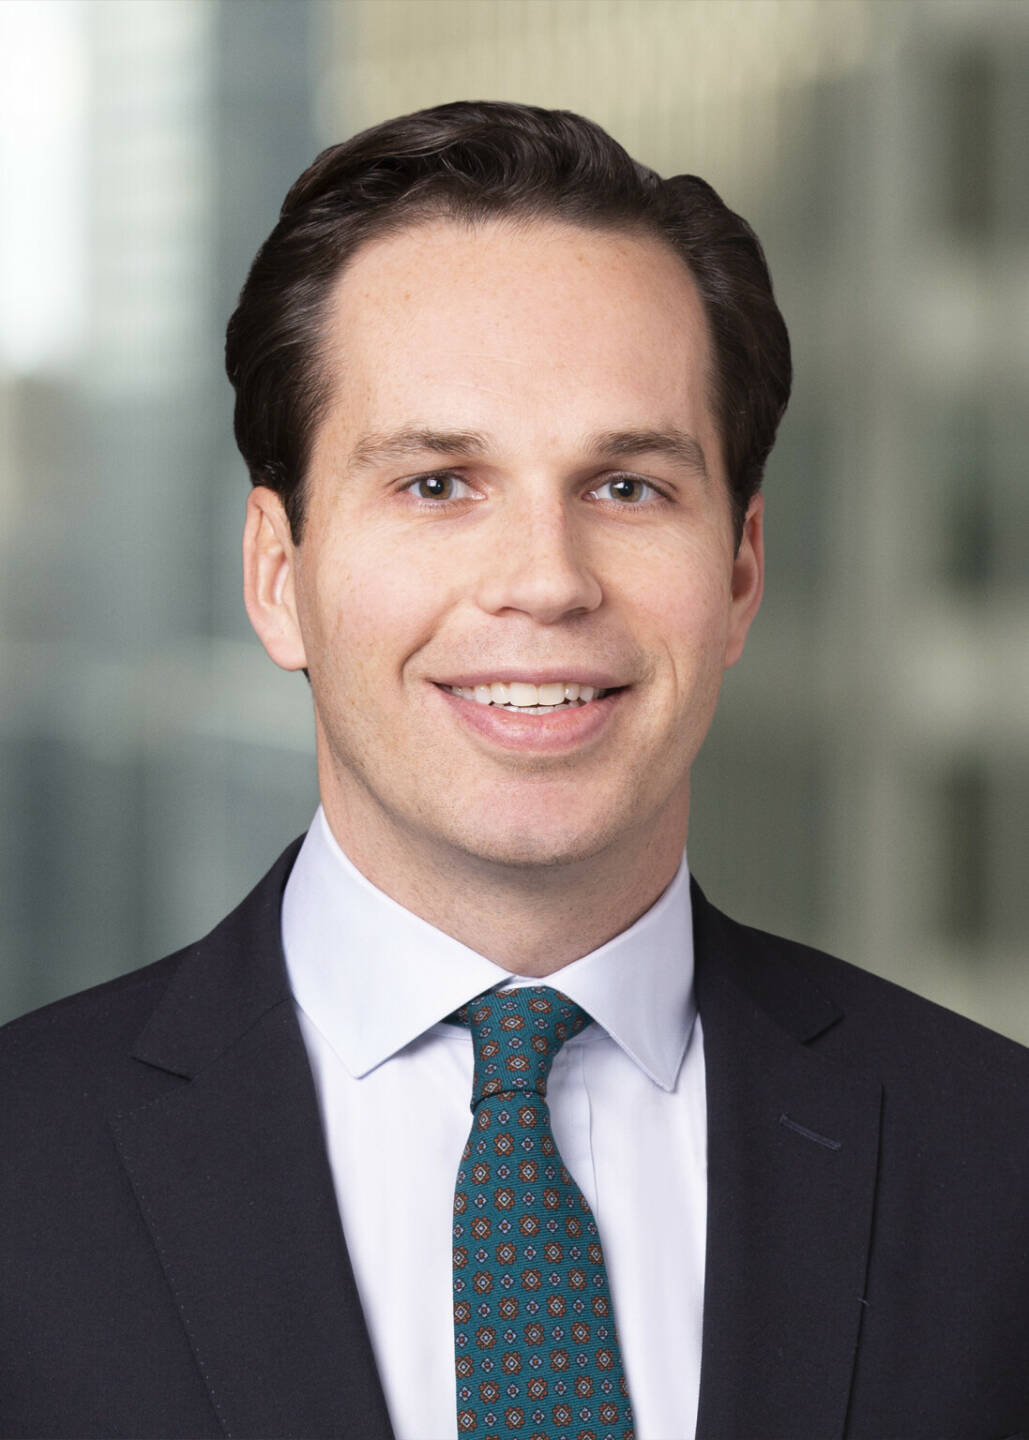 John Donnelly, Global Small- and Mid-Cap Equity Portfolio Manager, Jennison Associates